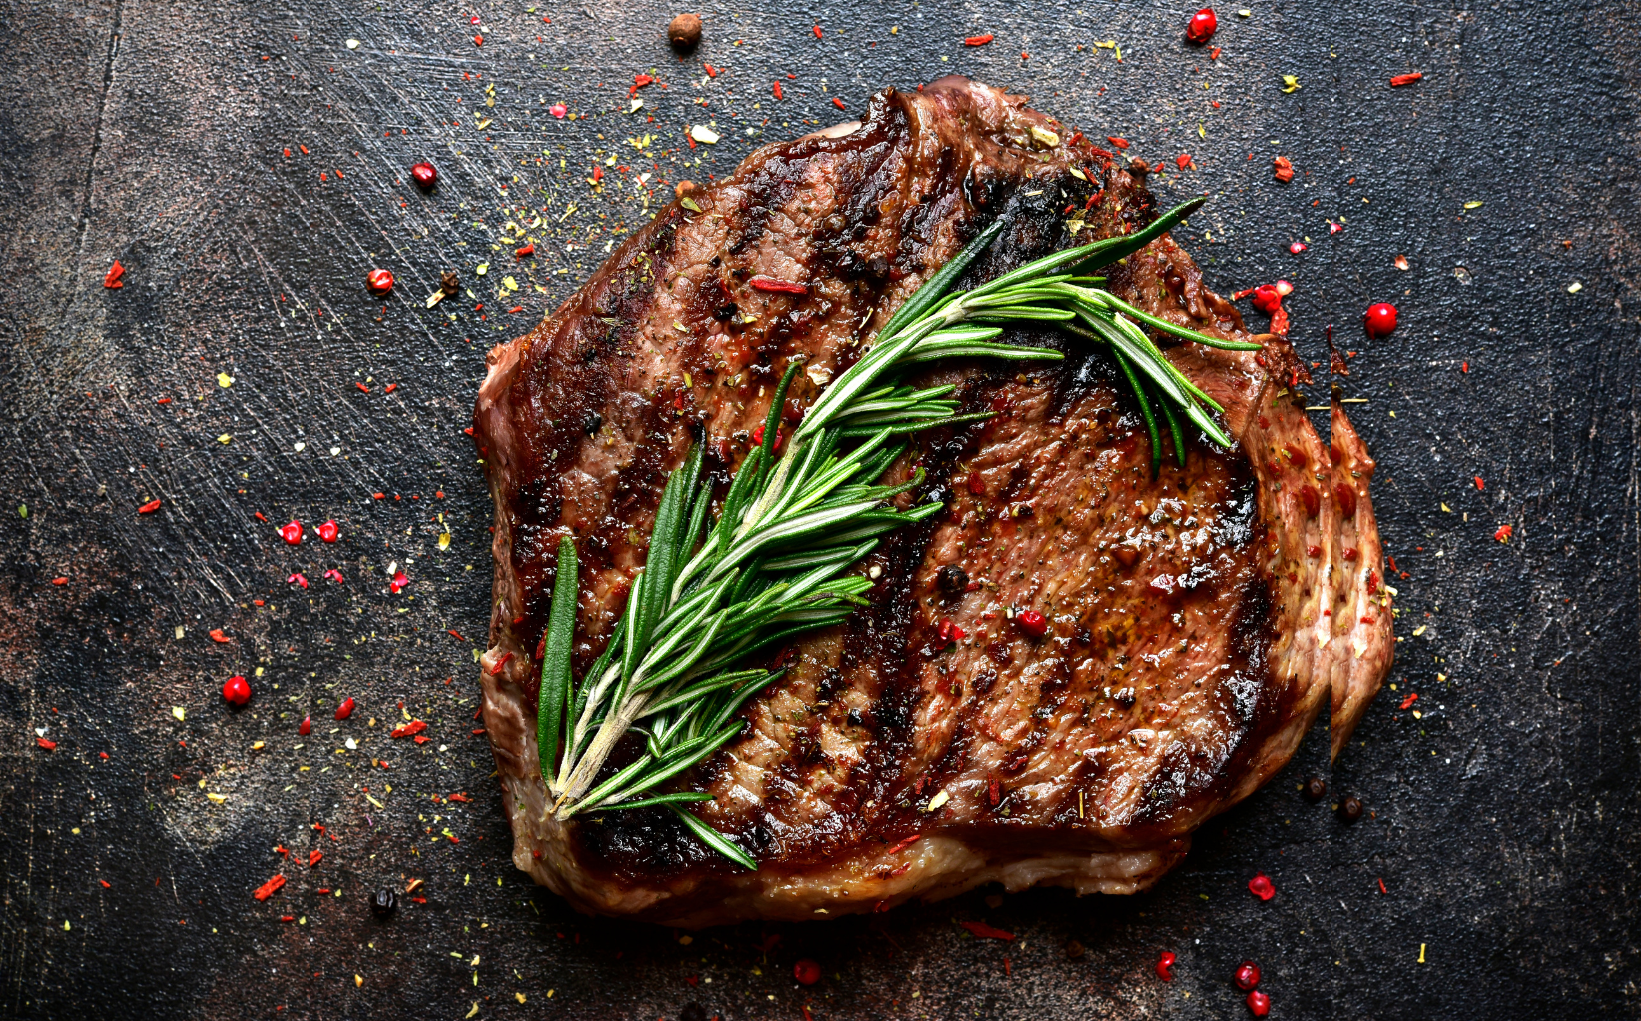 Calling All Steak Enthusiasts!